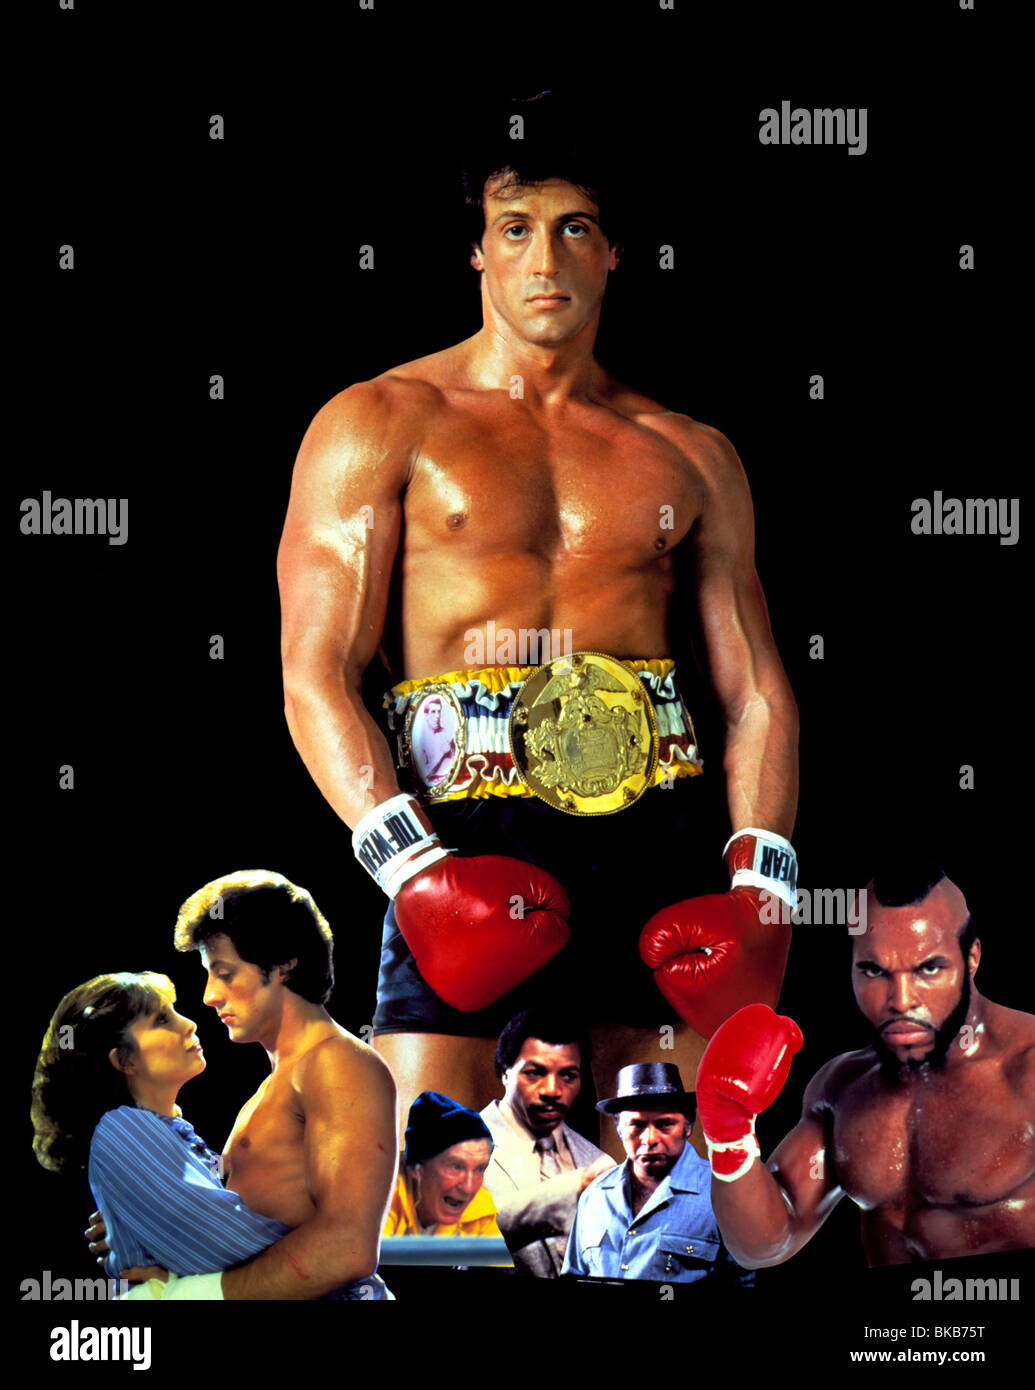 ROCKY III (1982) TALIA SHIRE, SYLVESTER STALLONE, BURGESS MEREDITH, CARL WEATHERS, BURT YOUNG, MR T RK3 003OS Stock Photo